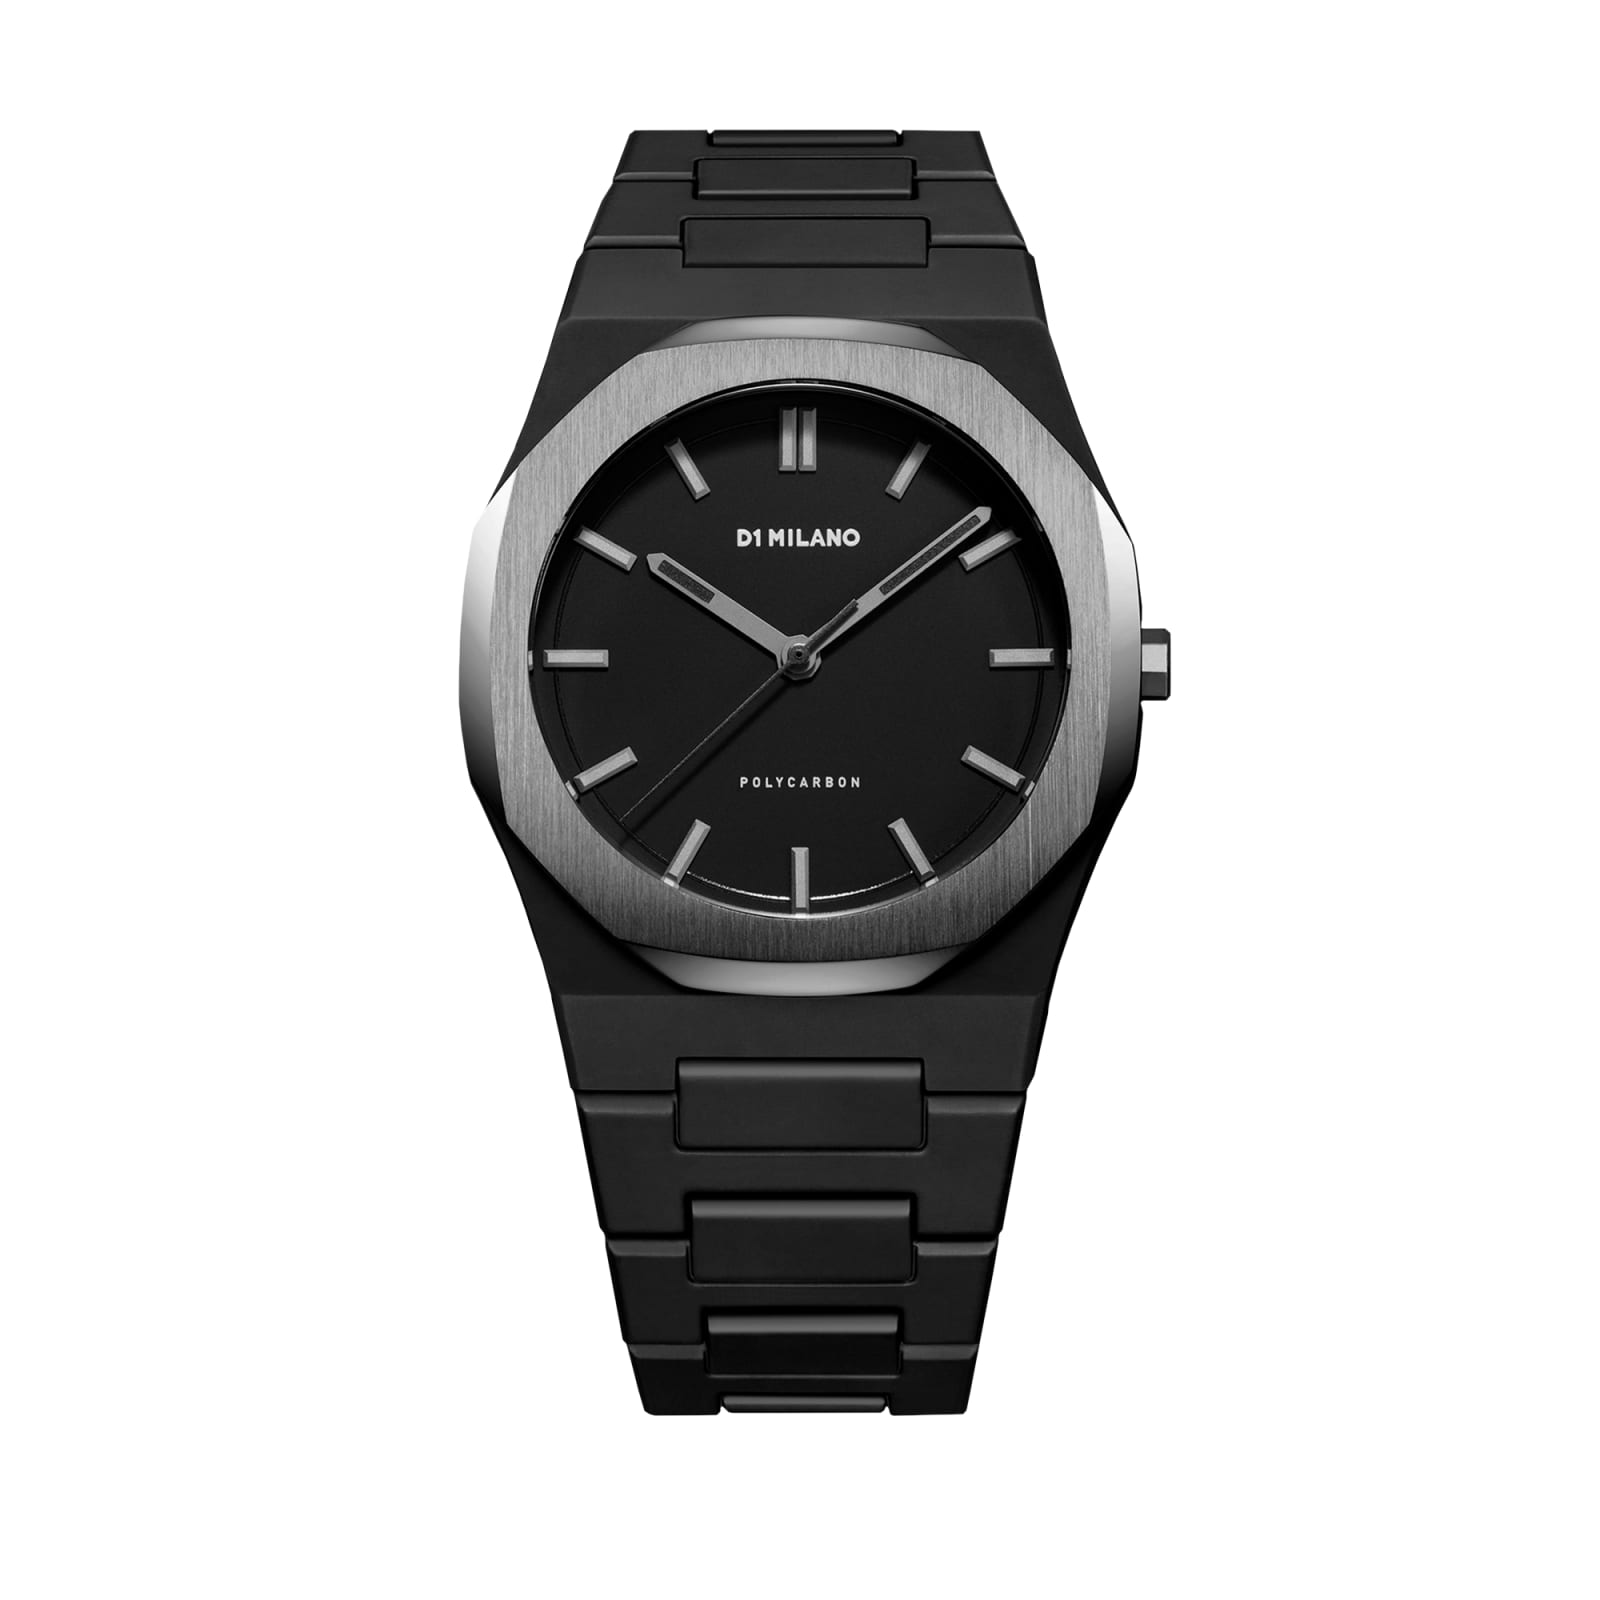 D1 Milano Space Grey Watches